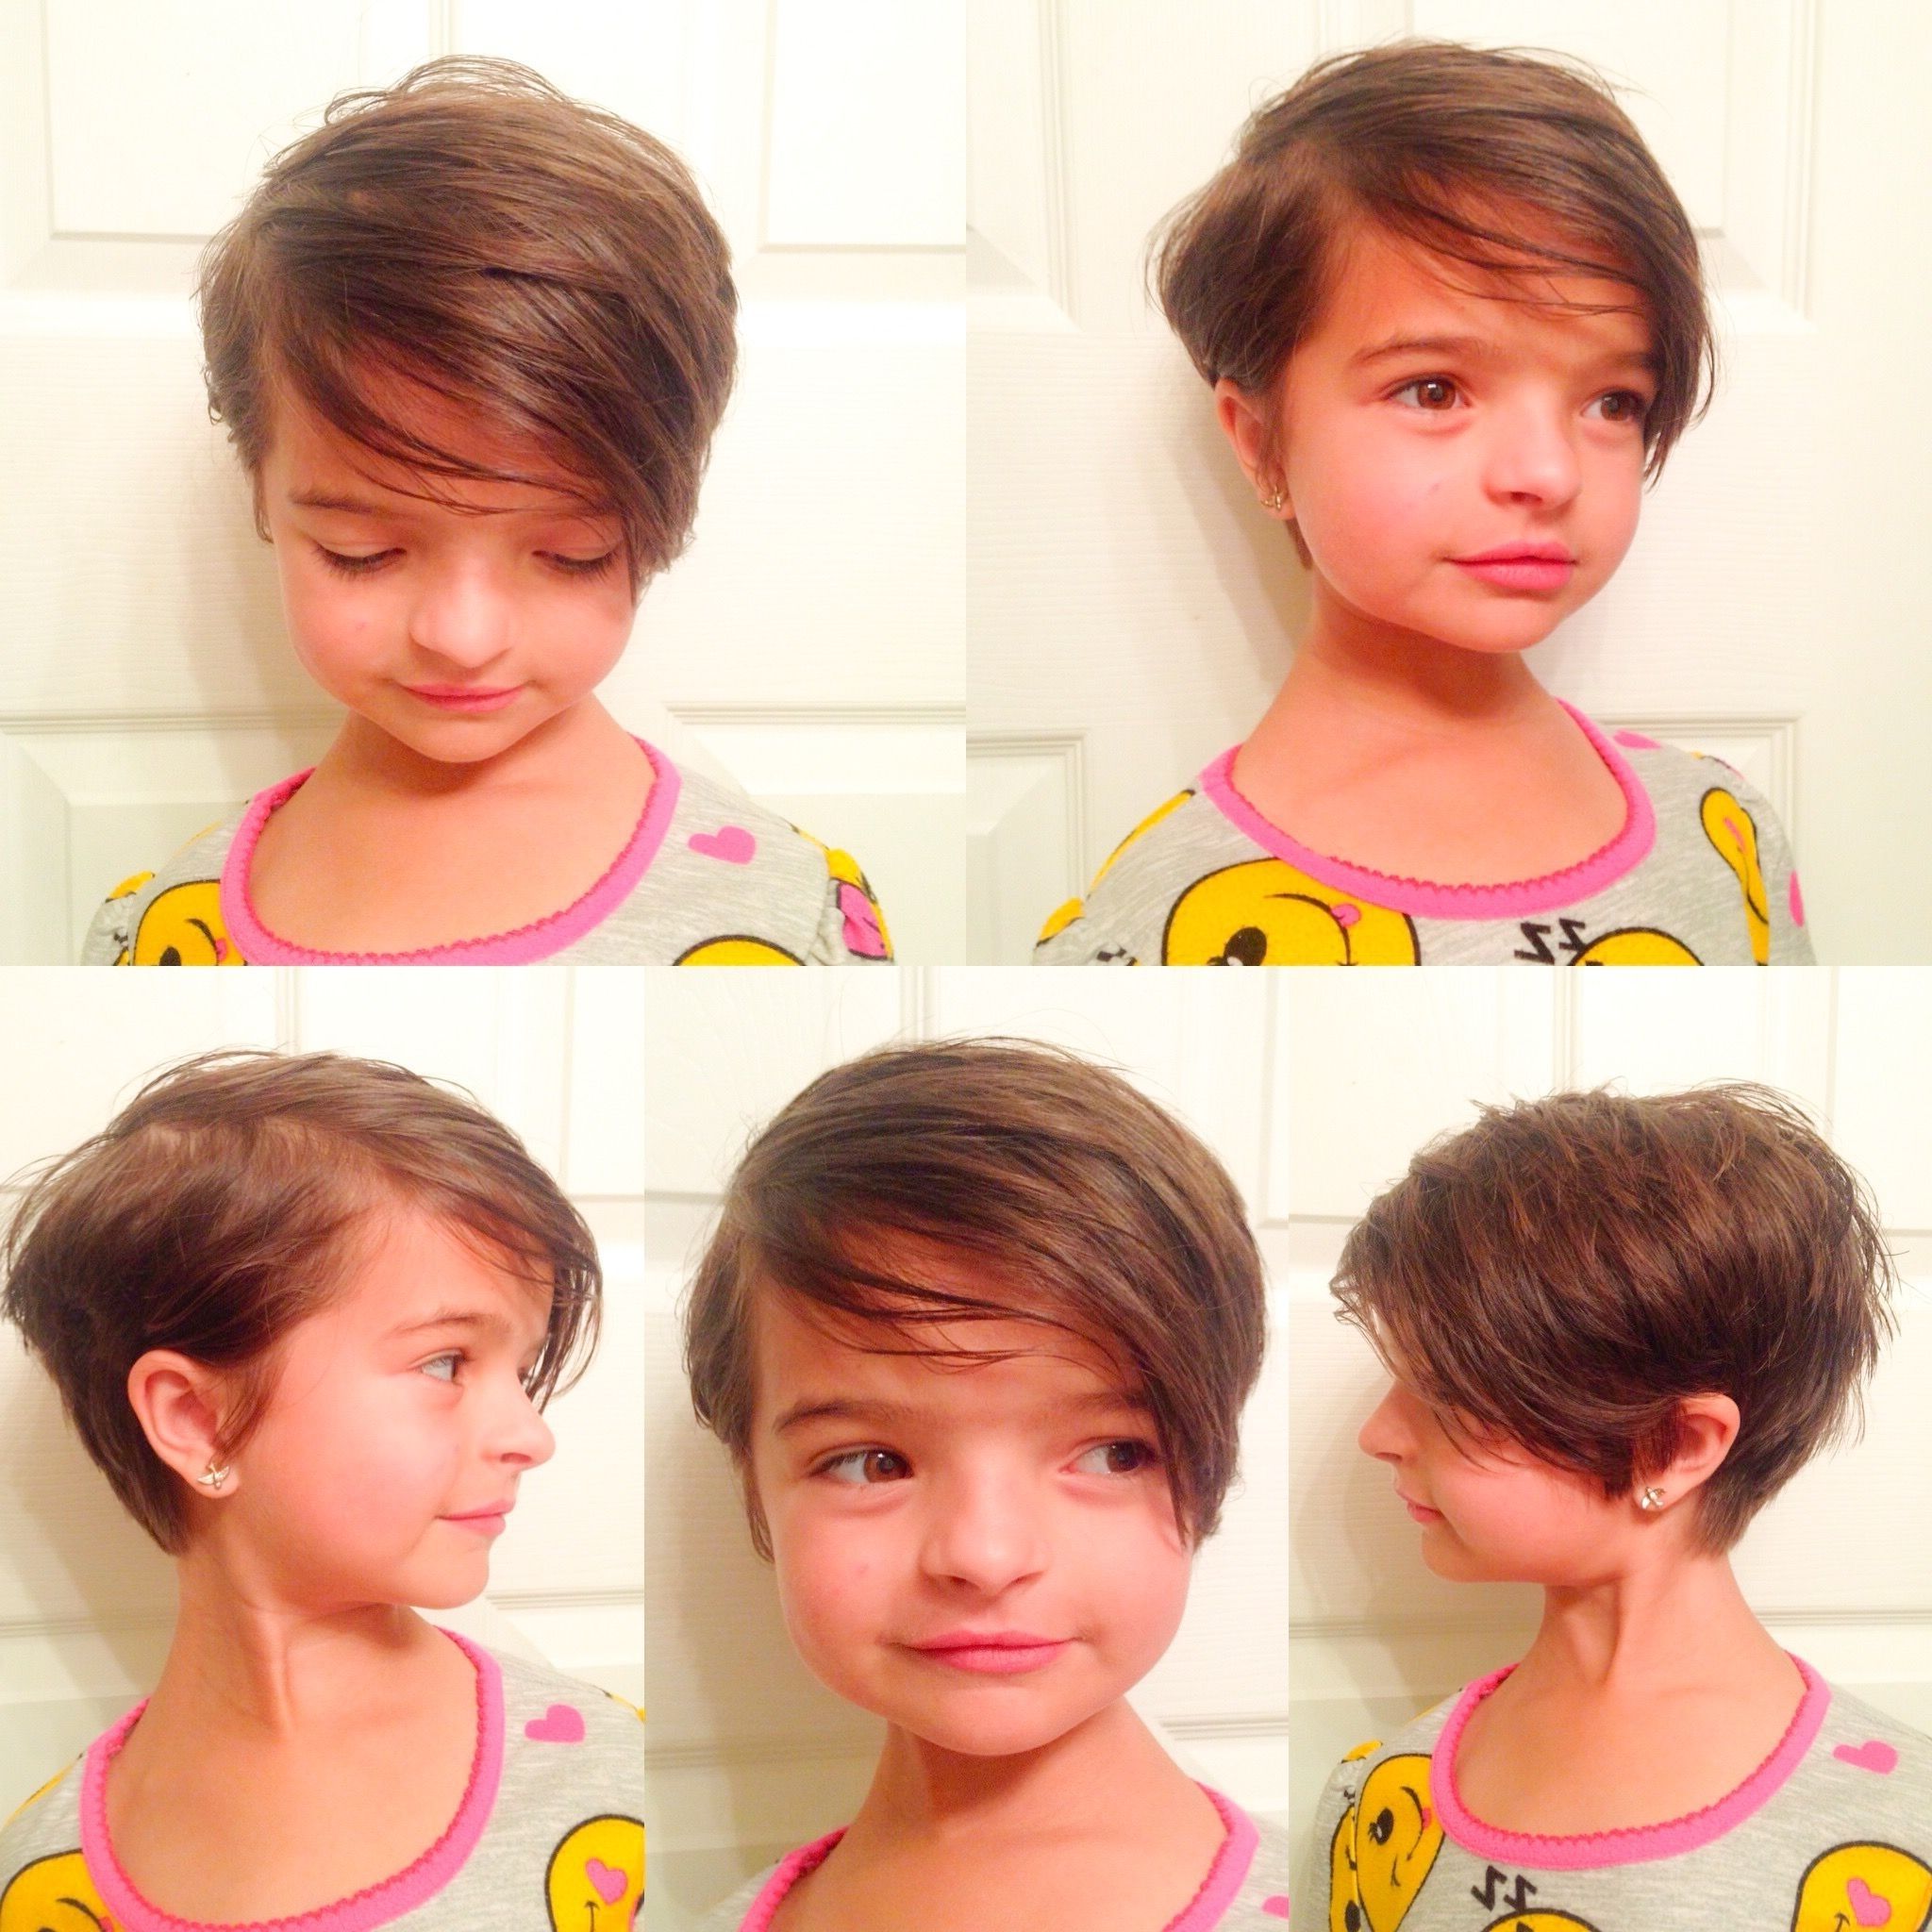 Little Girl's Haircut, Little Girl's Hairstyle, Pixie Cut, Short Throughout Current Toddler Pixie Hairstyles (View 4 of 15)